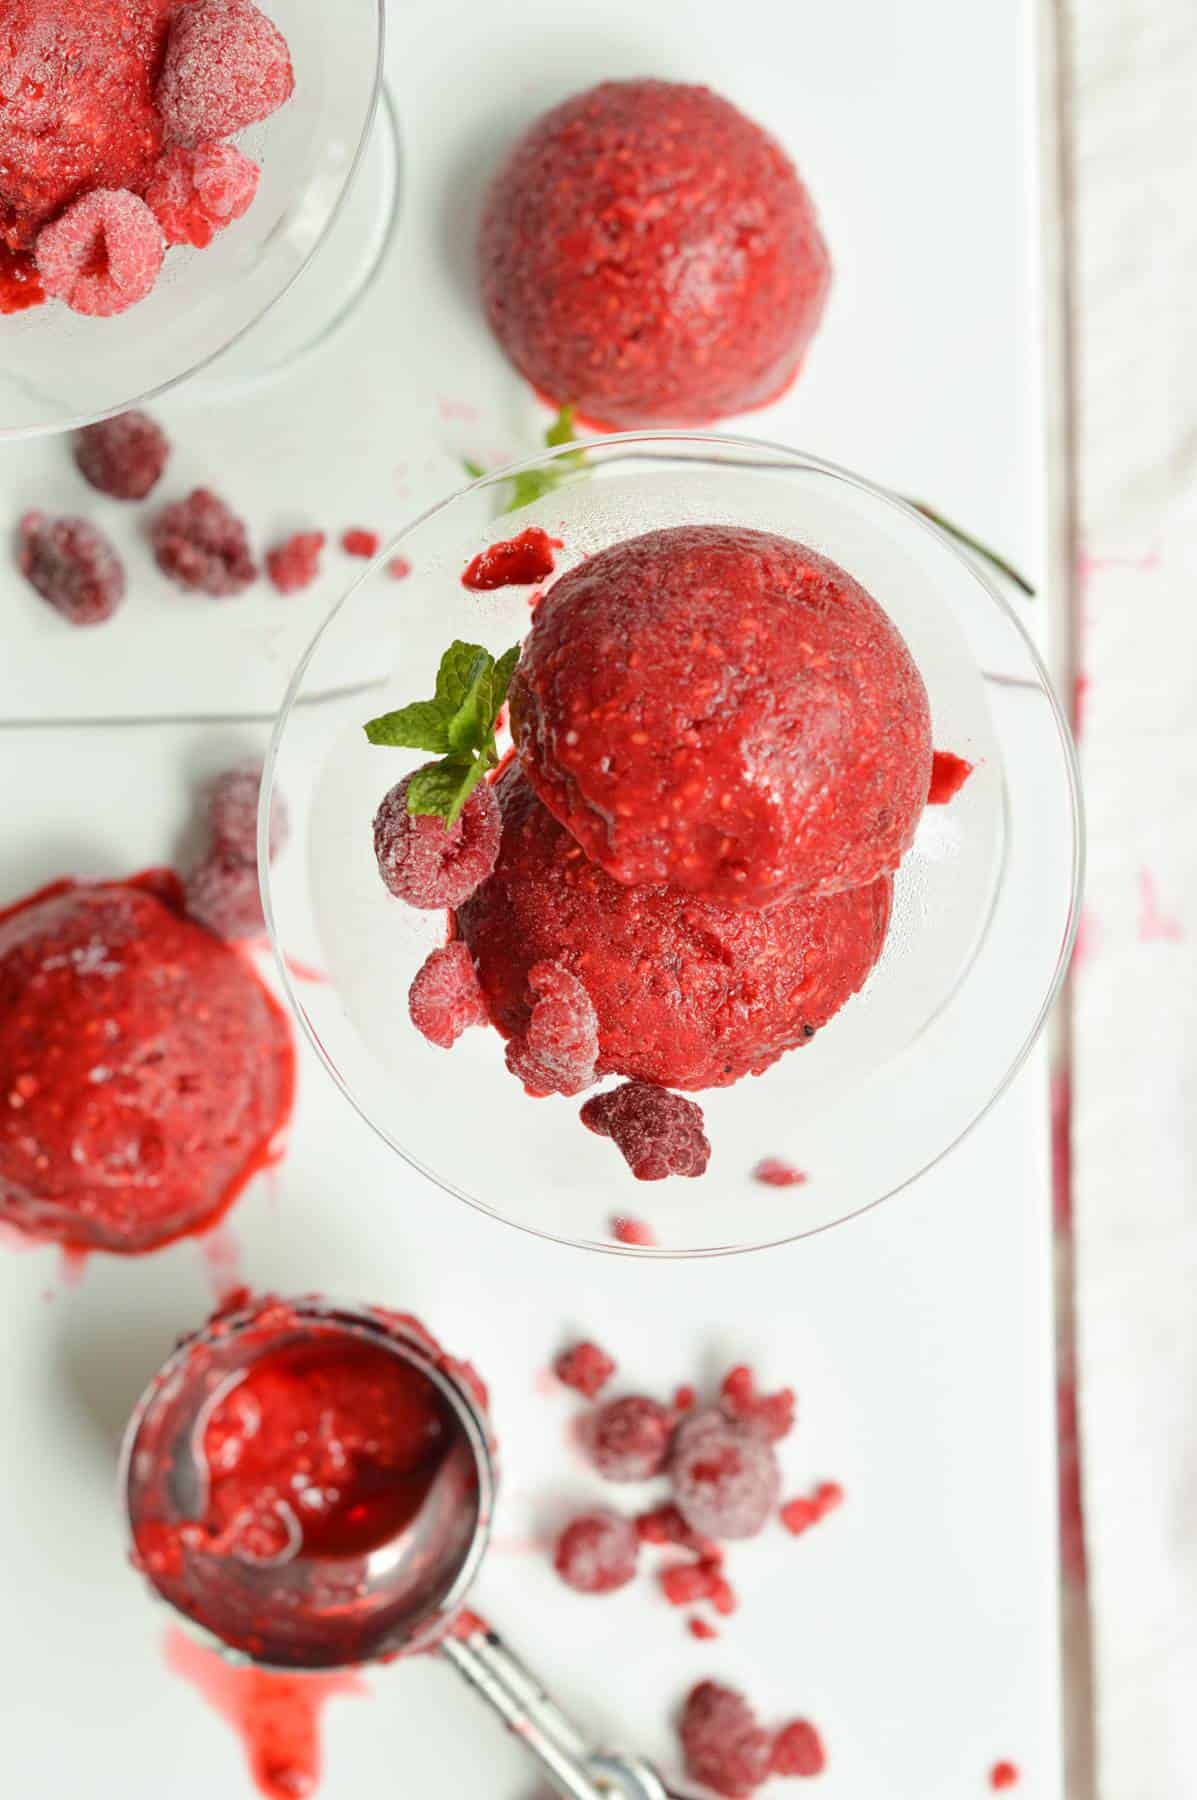 Sugar-Free Raspberry Sorbet Recipe (Only 4 Ingredients!) - The ...